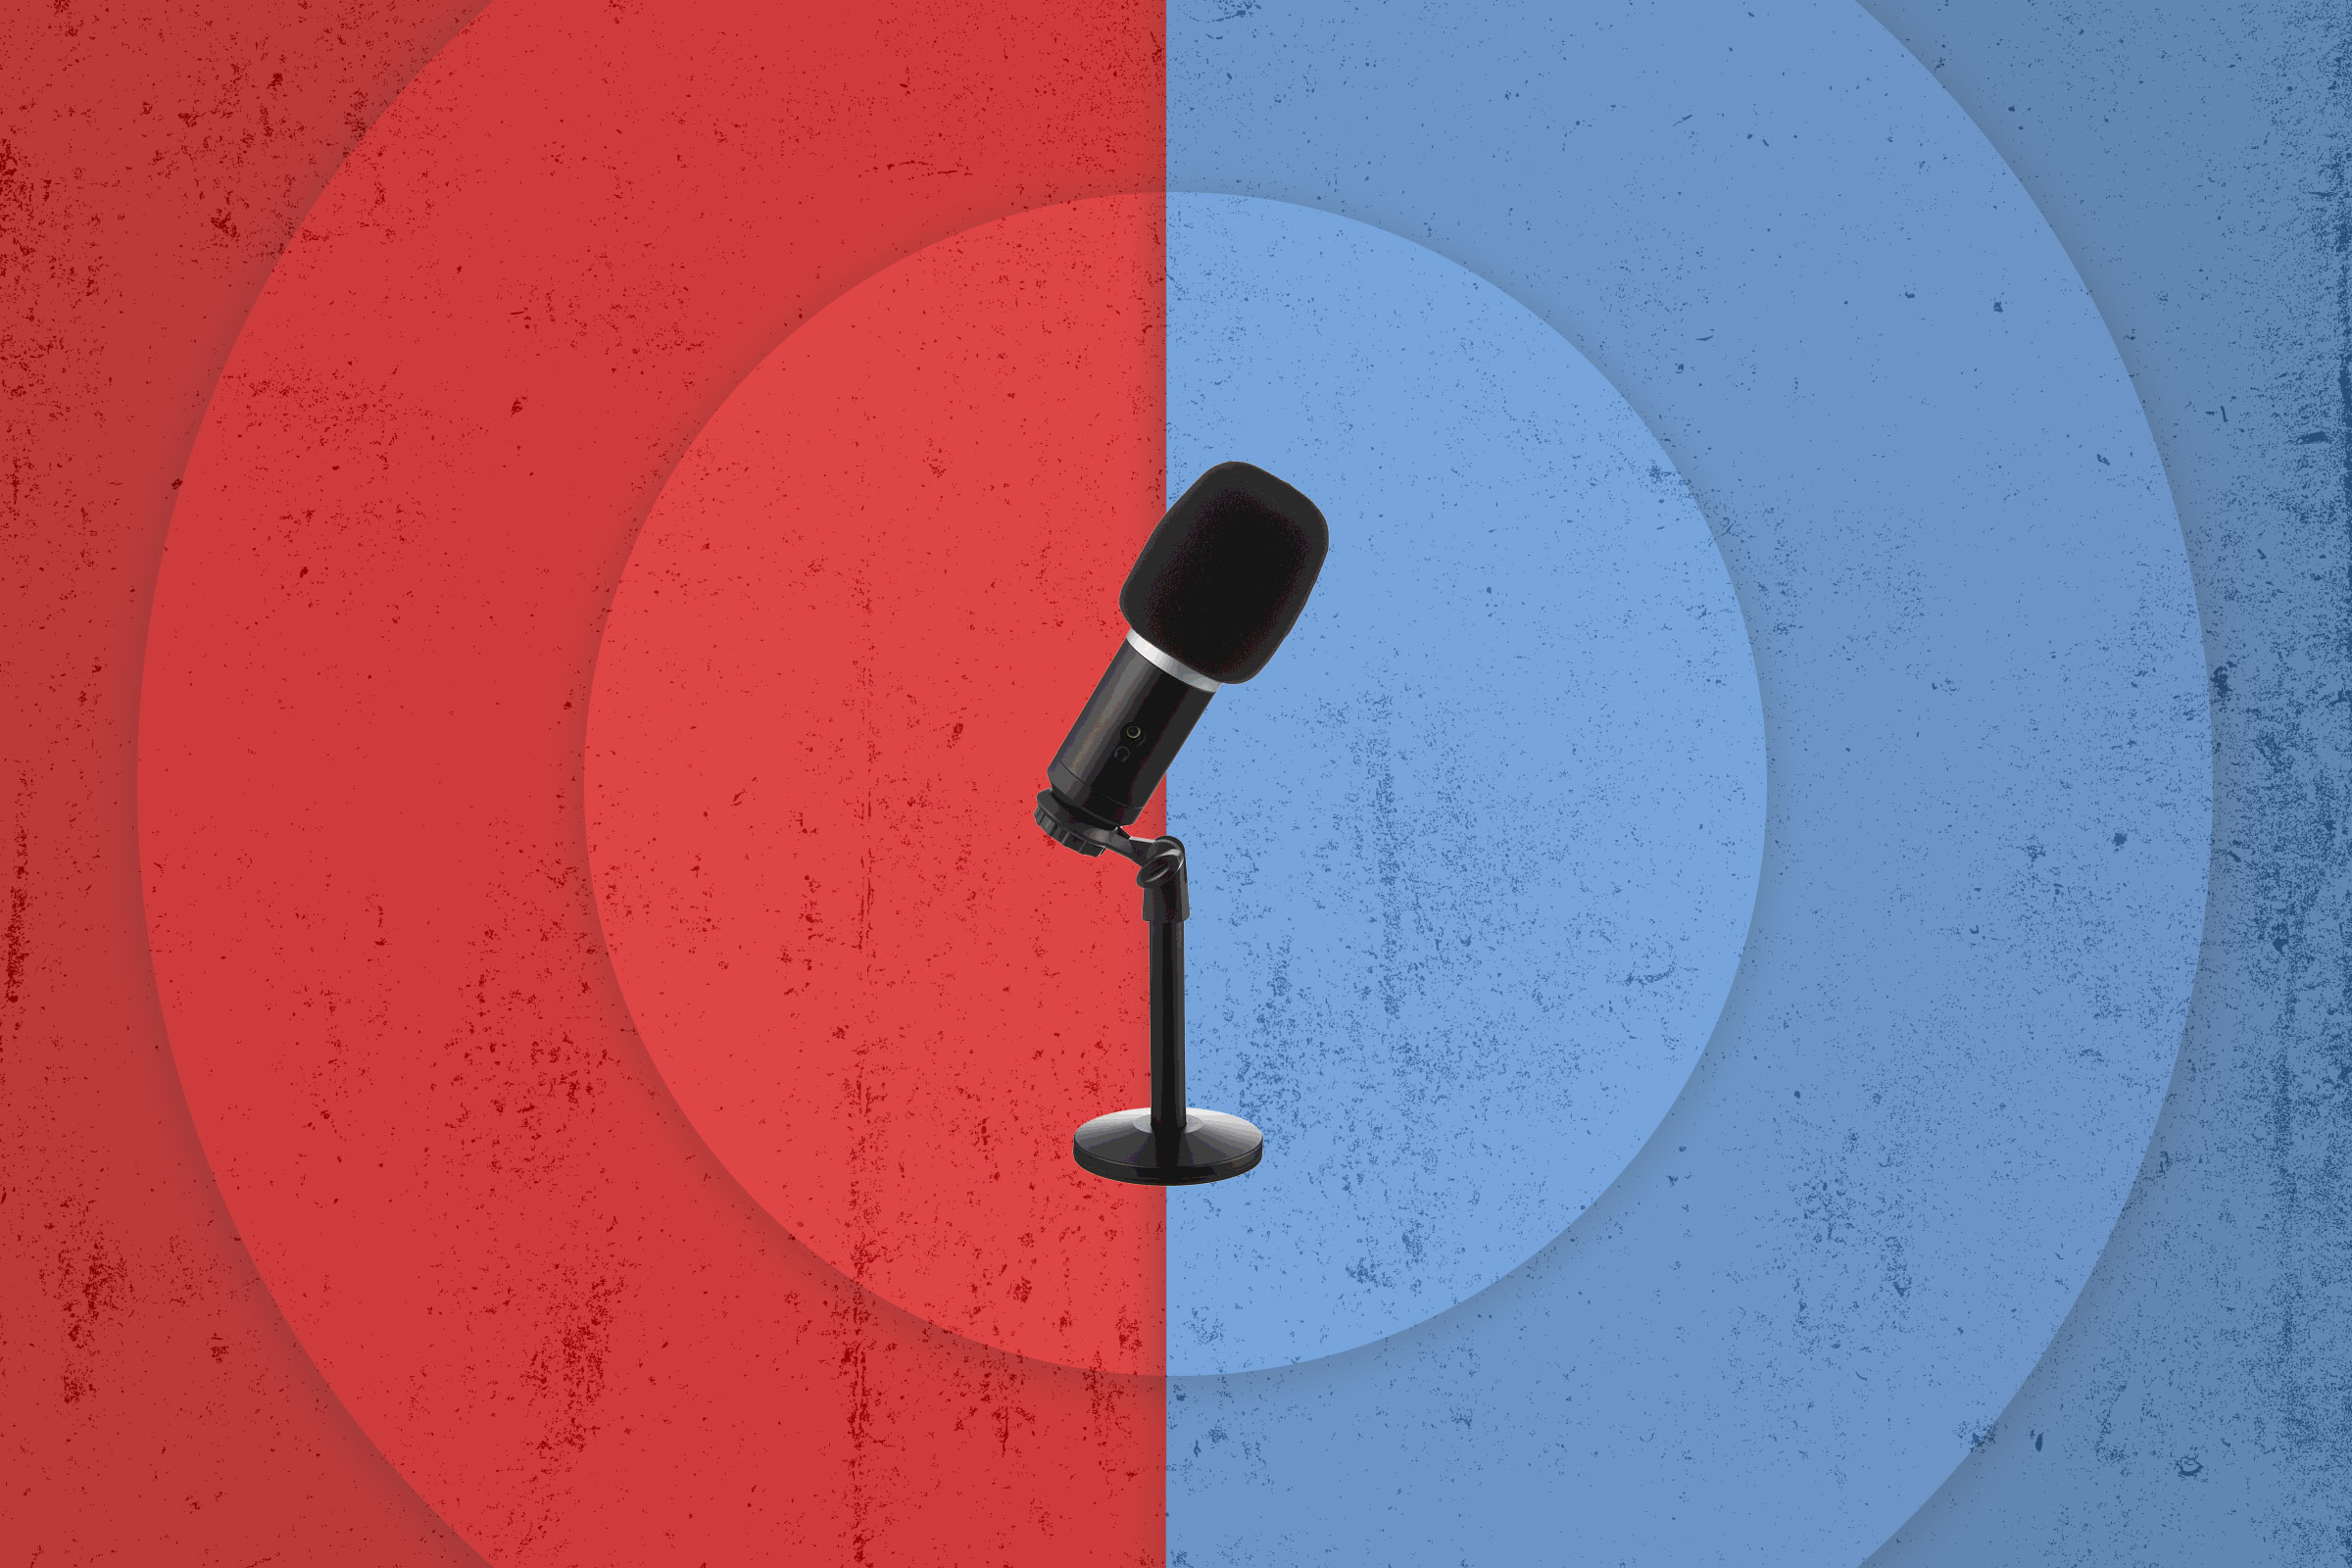 A podcast microphone surrounded by blue and red circles